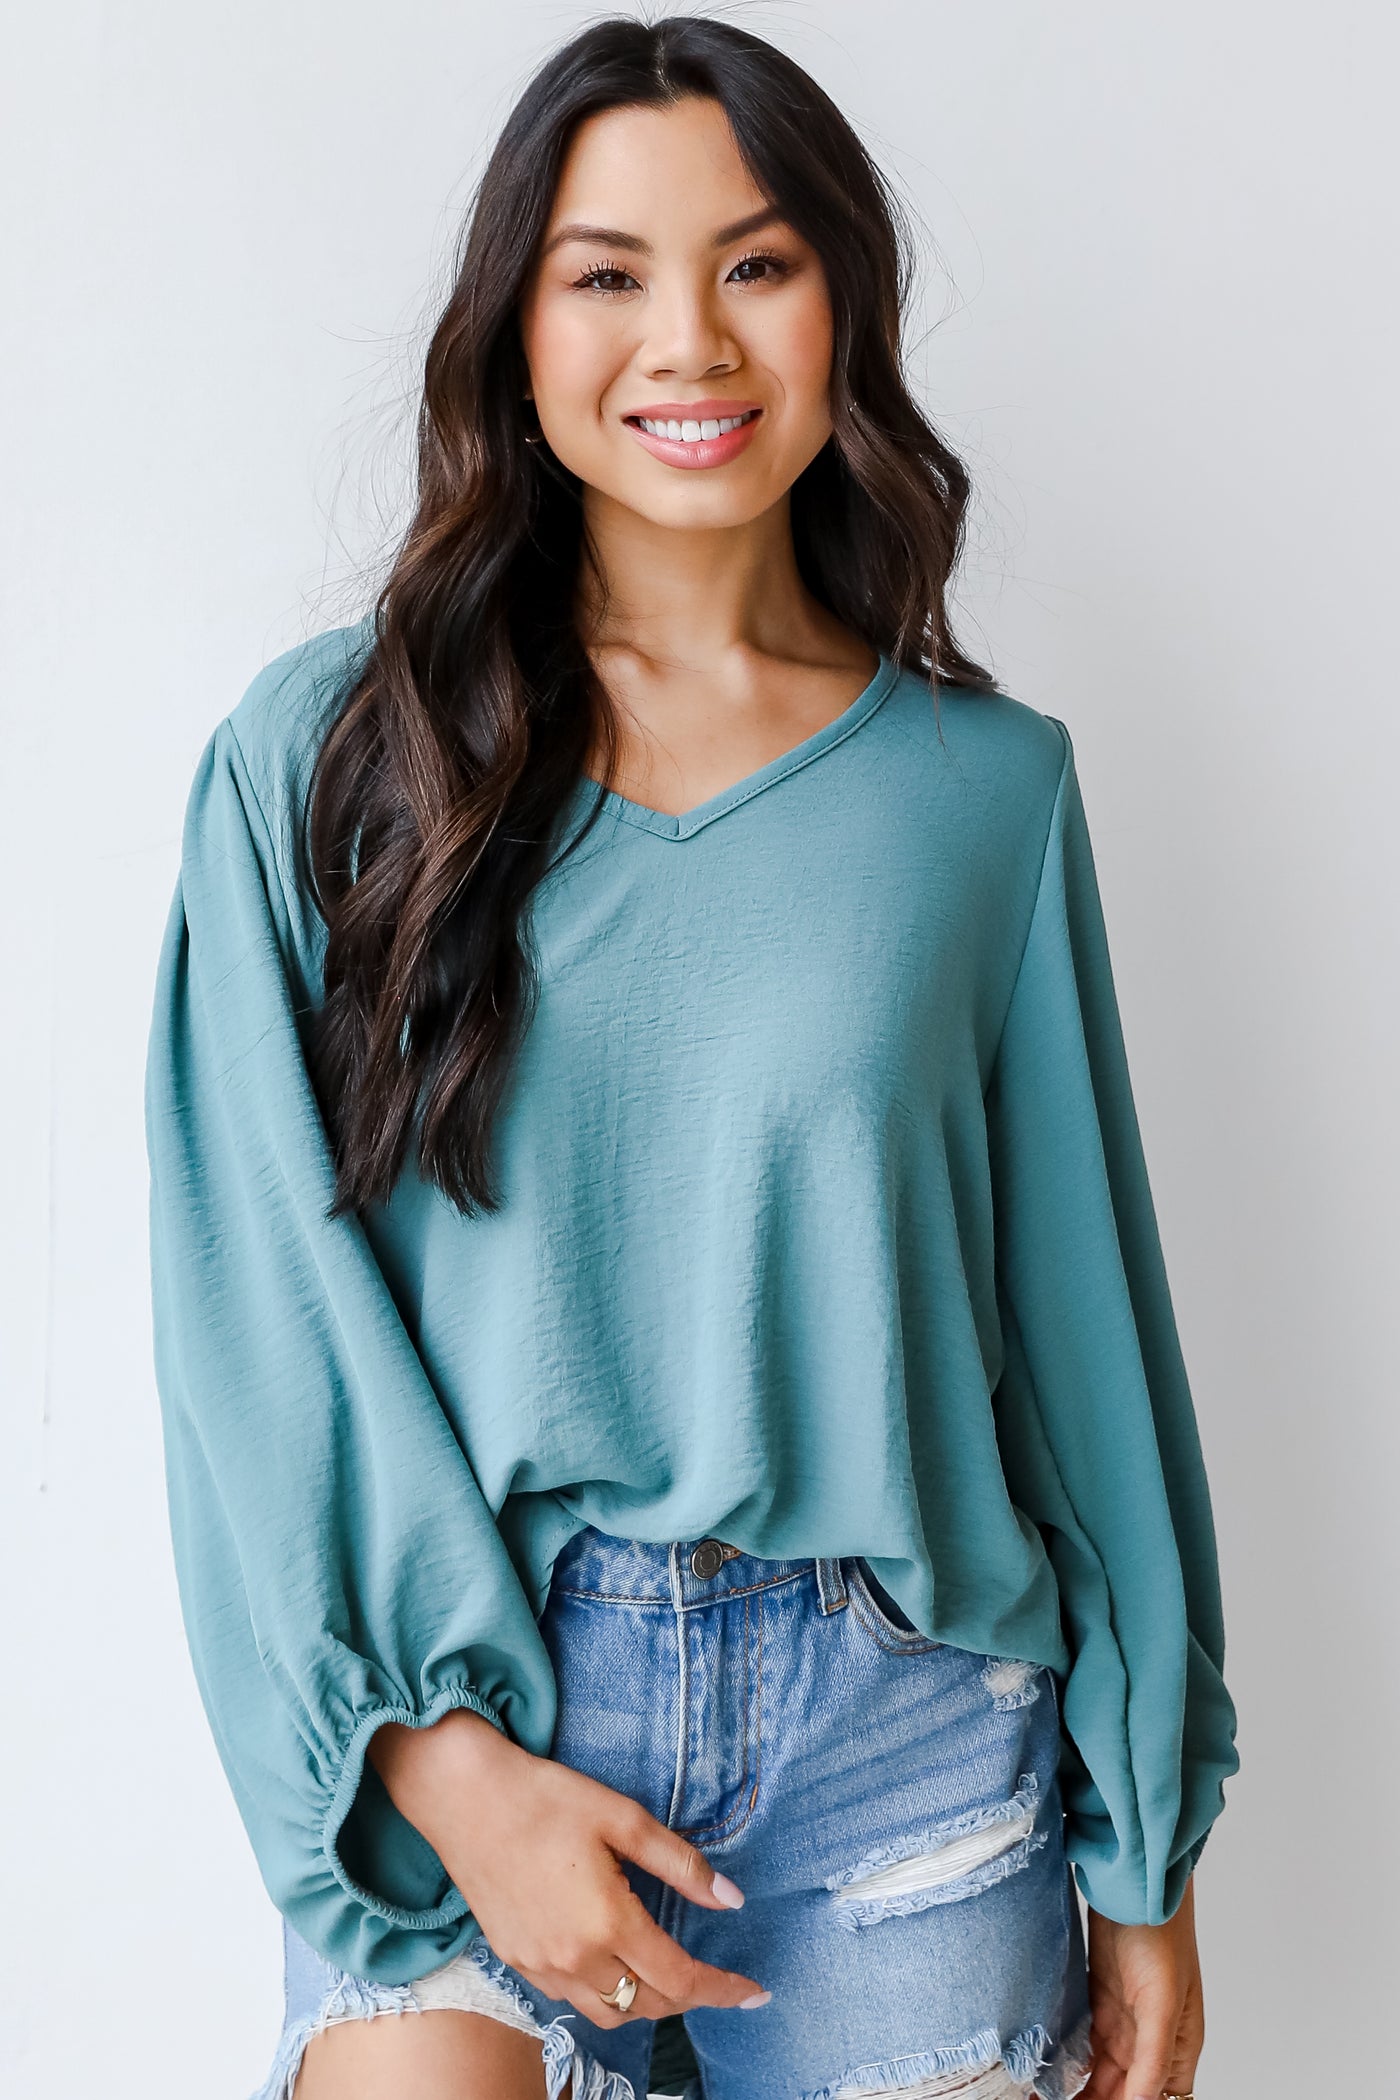 Blouse in seafoam front view